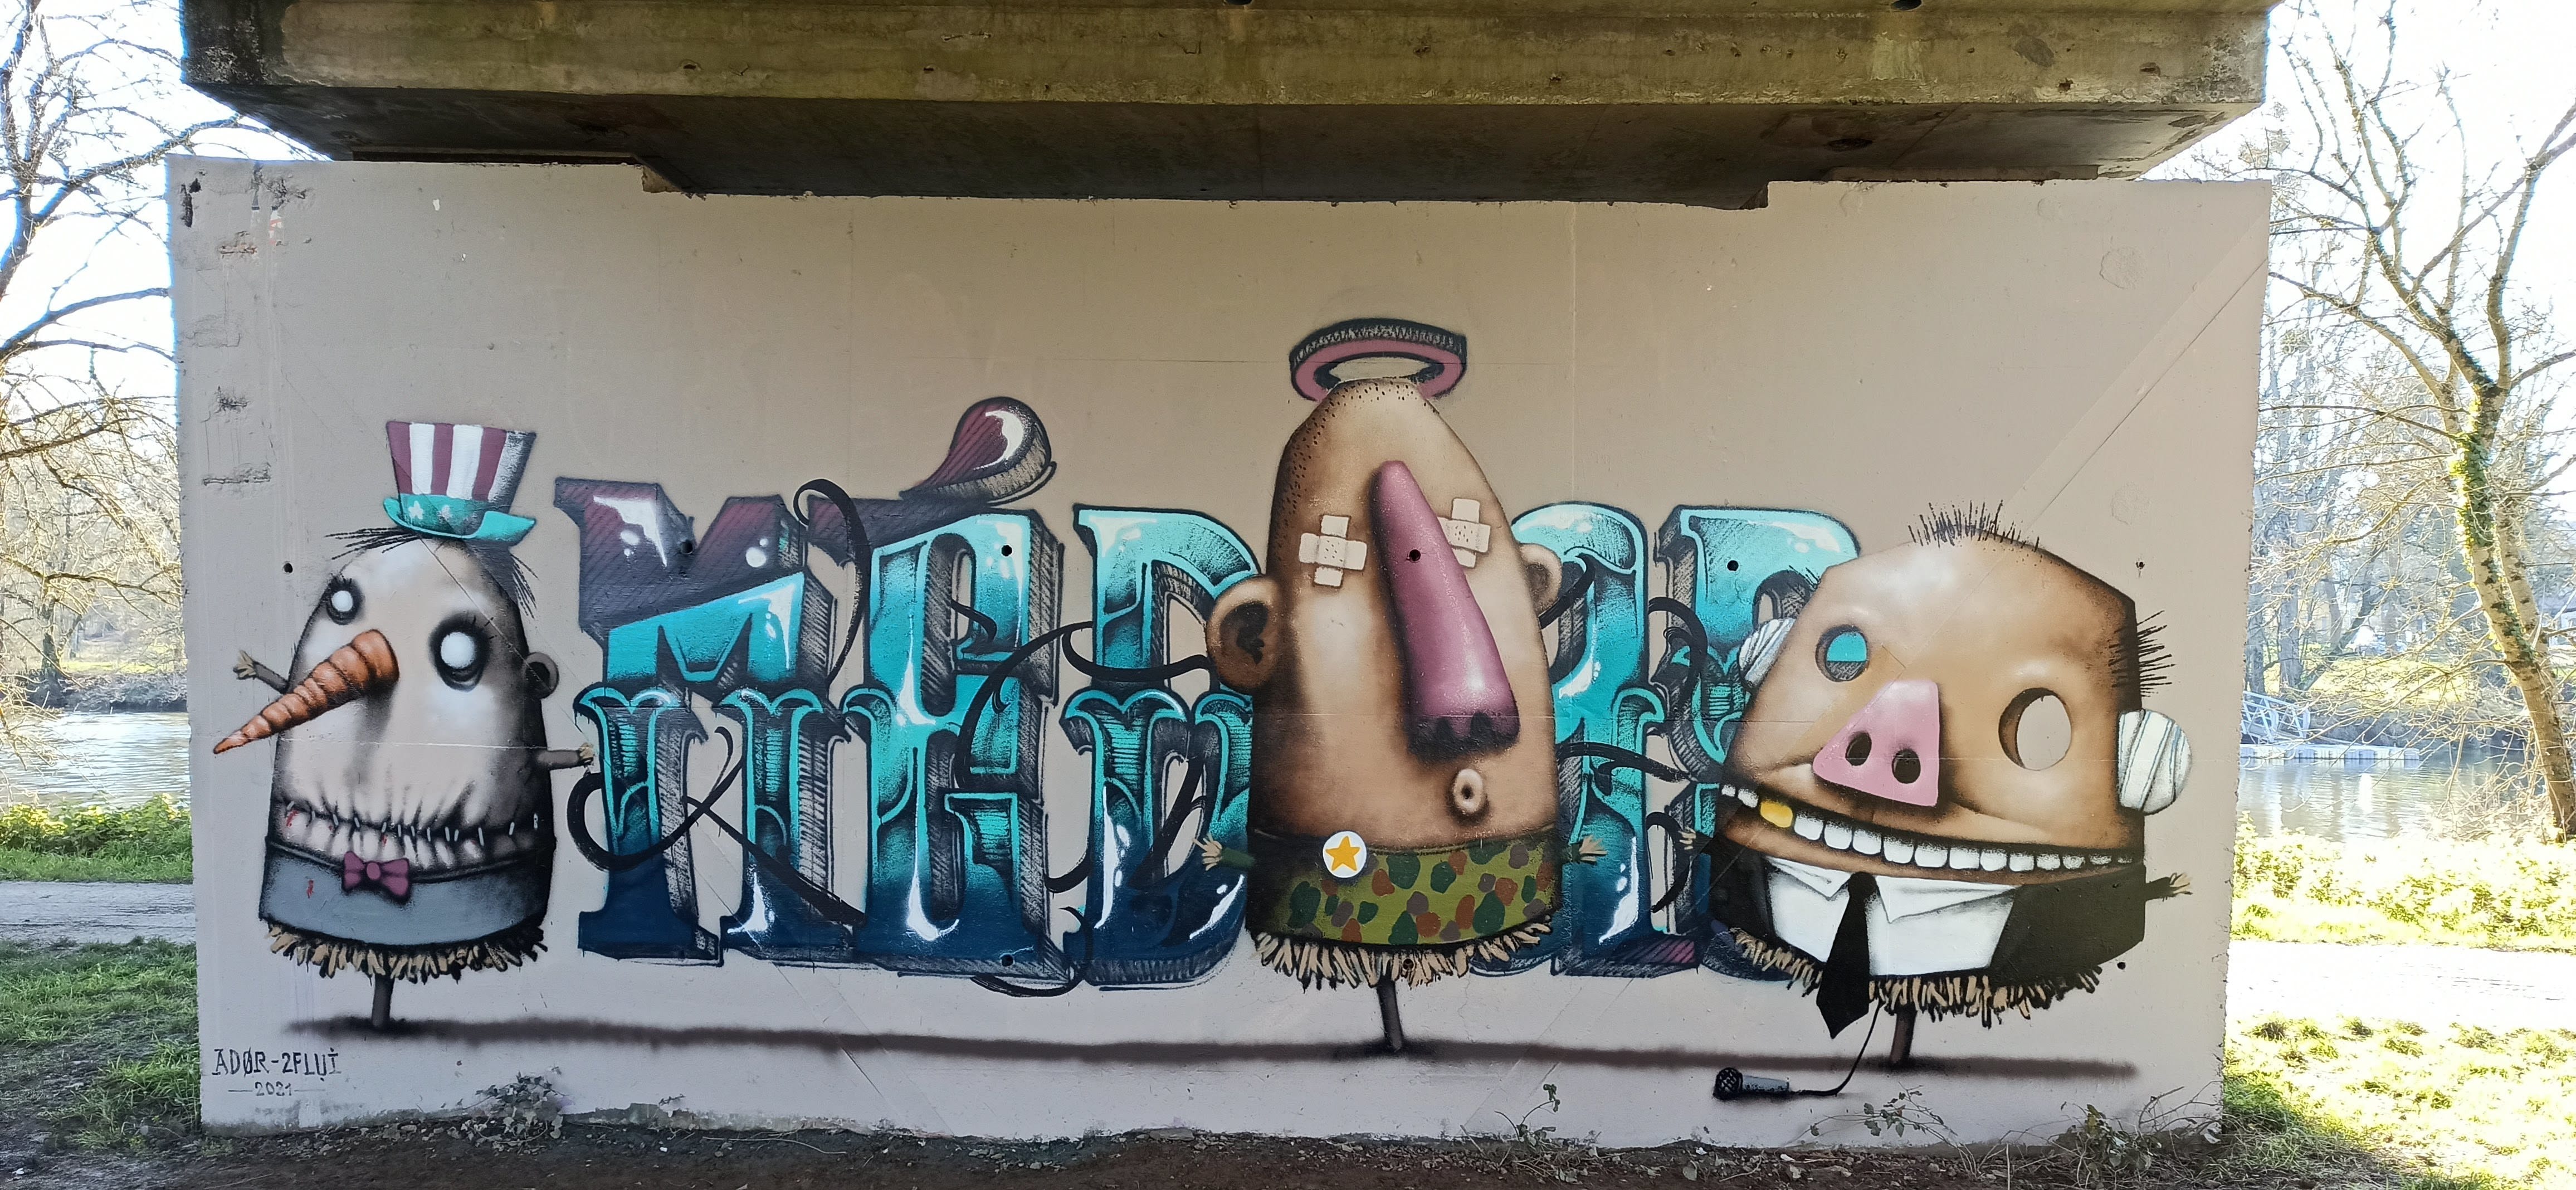 Graffiti 4699  by the artist Ador captured by Rabot in Rezé France